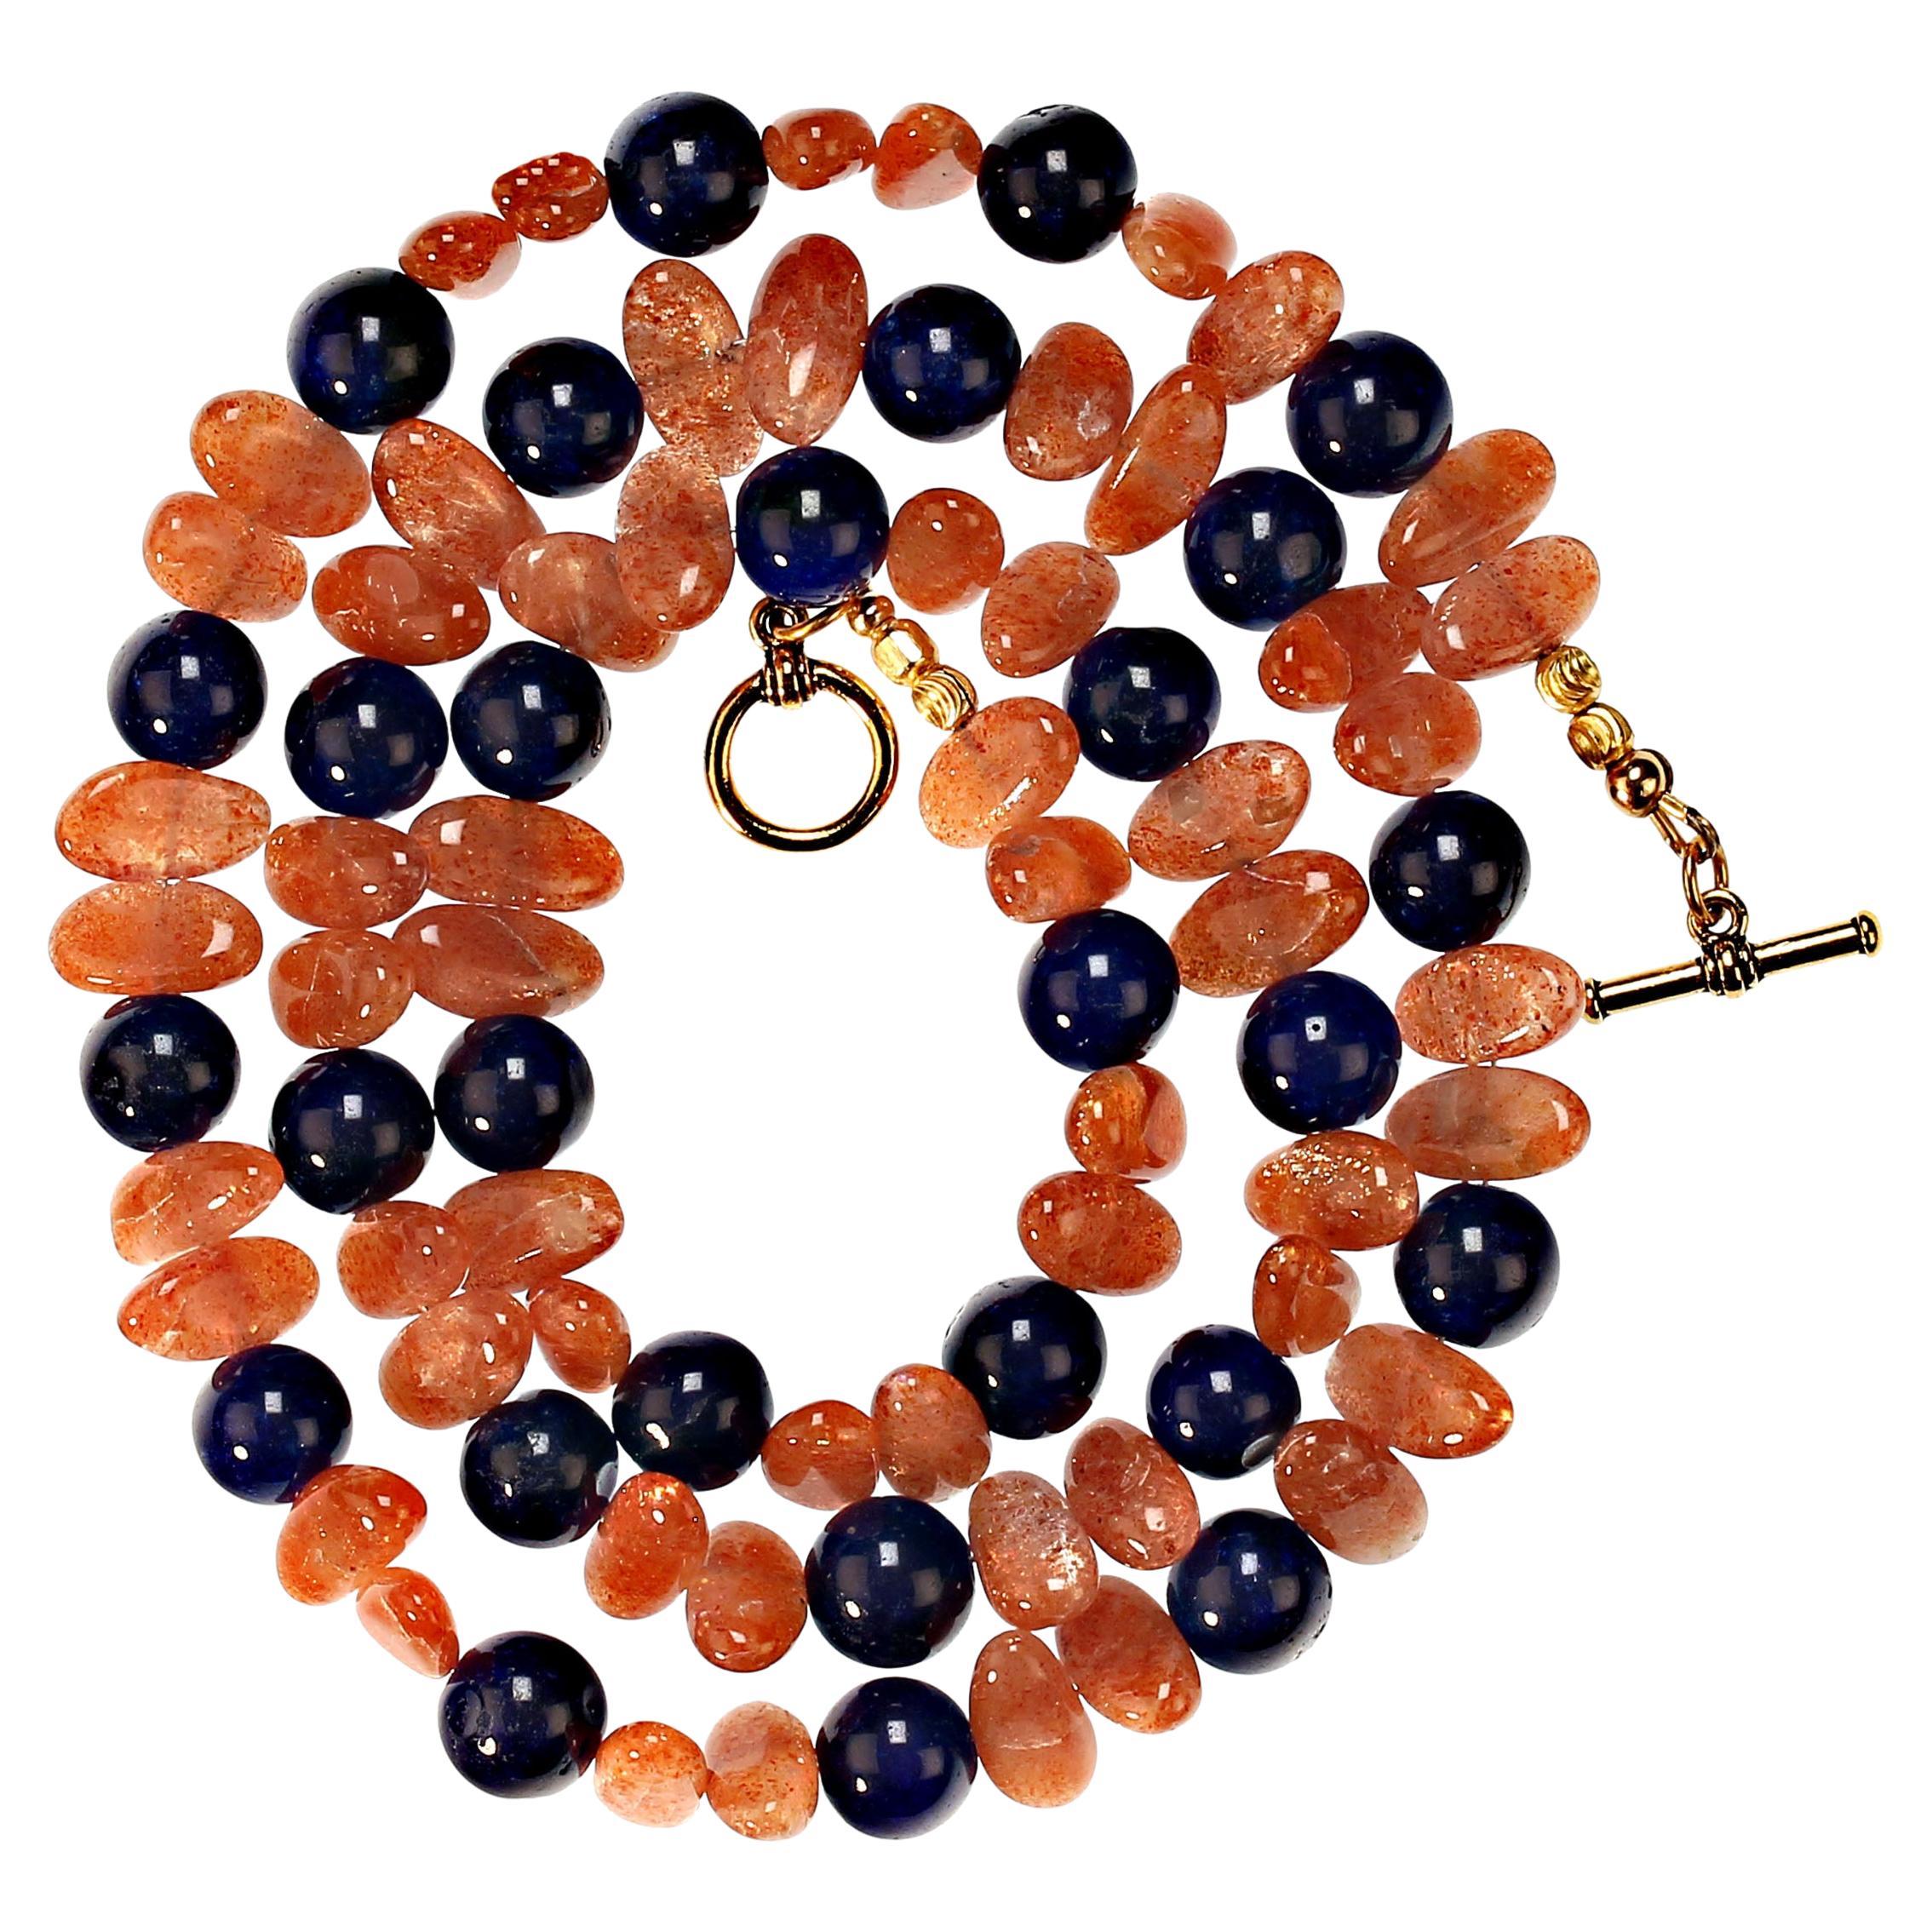 Glittering Sunstone is such fun to wear! This necklace sparkles and glimmers and then it moves! Wear this 28 inch necklace of Sunstone and dyed Blue Agate to enhance all your blue, beige, black, and white. It's the perfect lightweight necklace of 28